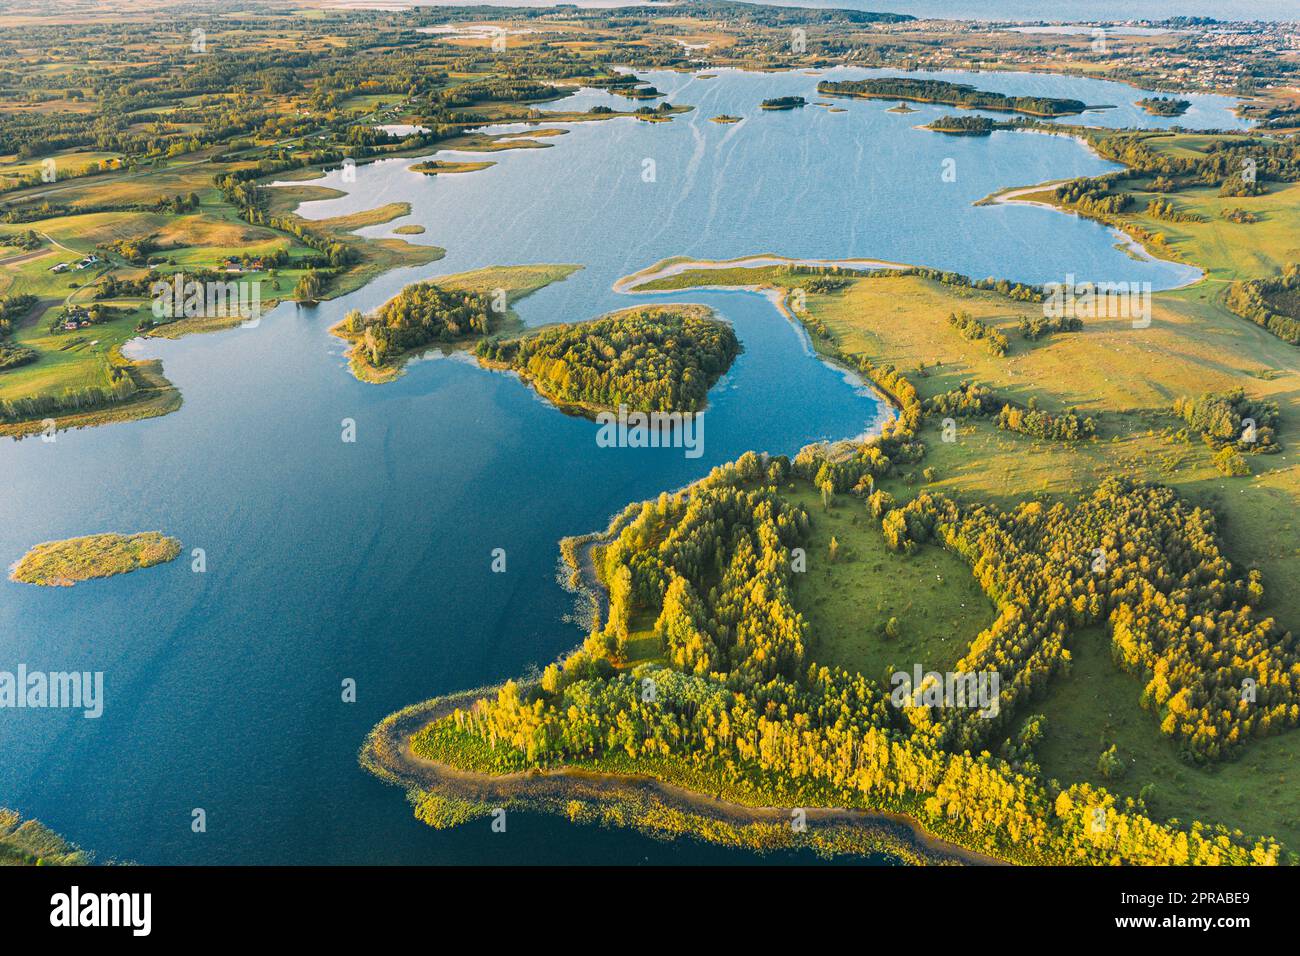 Braslaw Or Braslau, Vitebsk Voblast, Belarus. Aerial View Of Nedrava Lake And Green Forest Landscape In Sunny Autumn Morning. Top View Of Beautiful European Nature From High Attitude. Bird's Eye View. Famous Lakes. Natural Landmarks Stock Photo